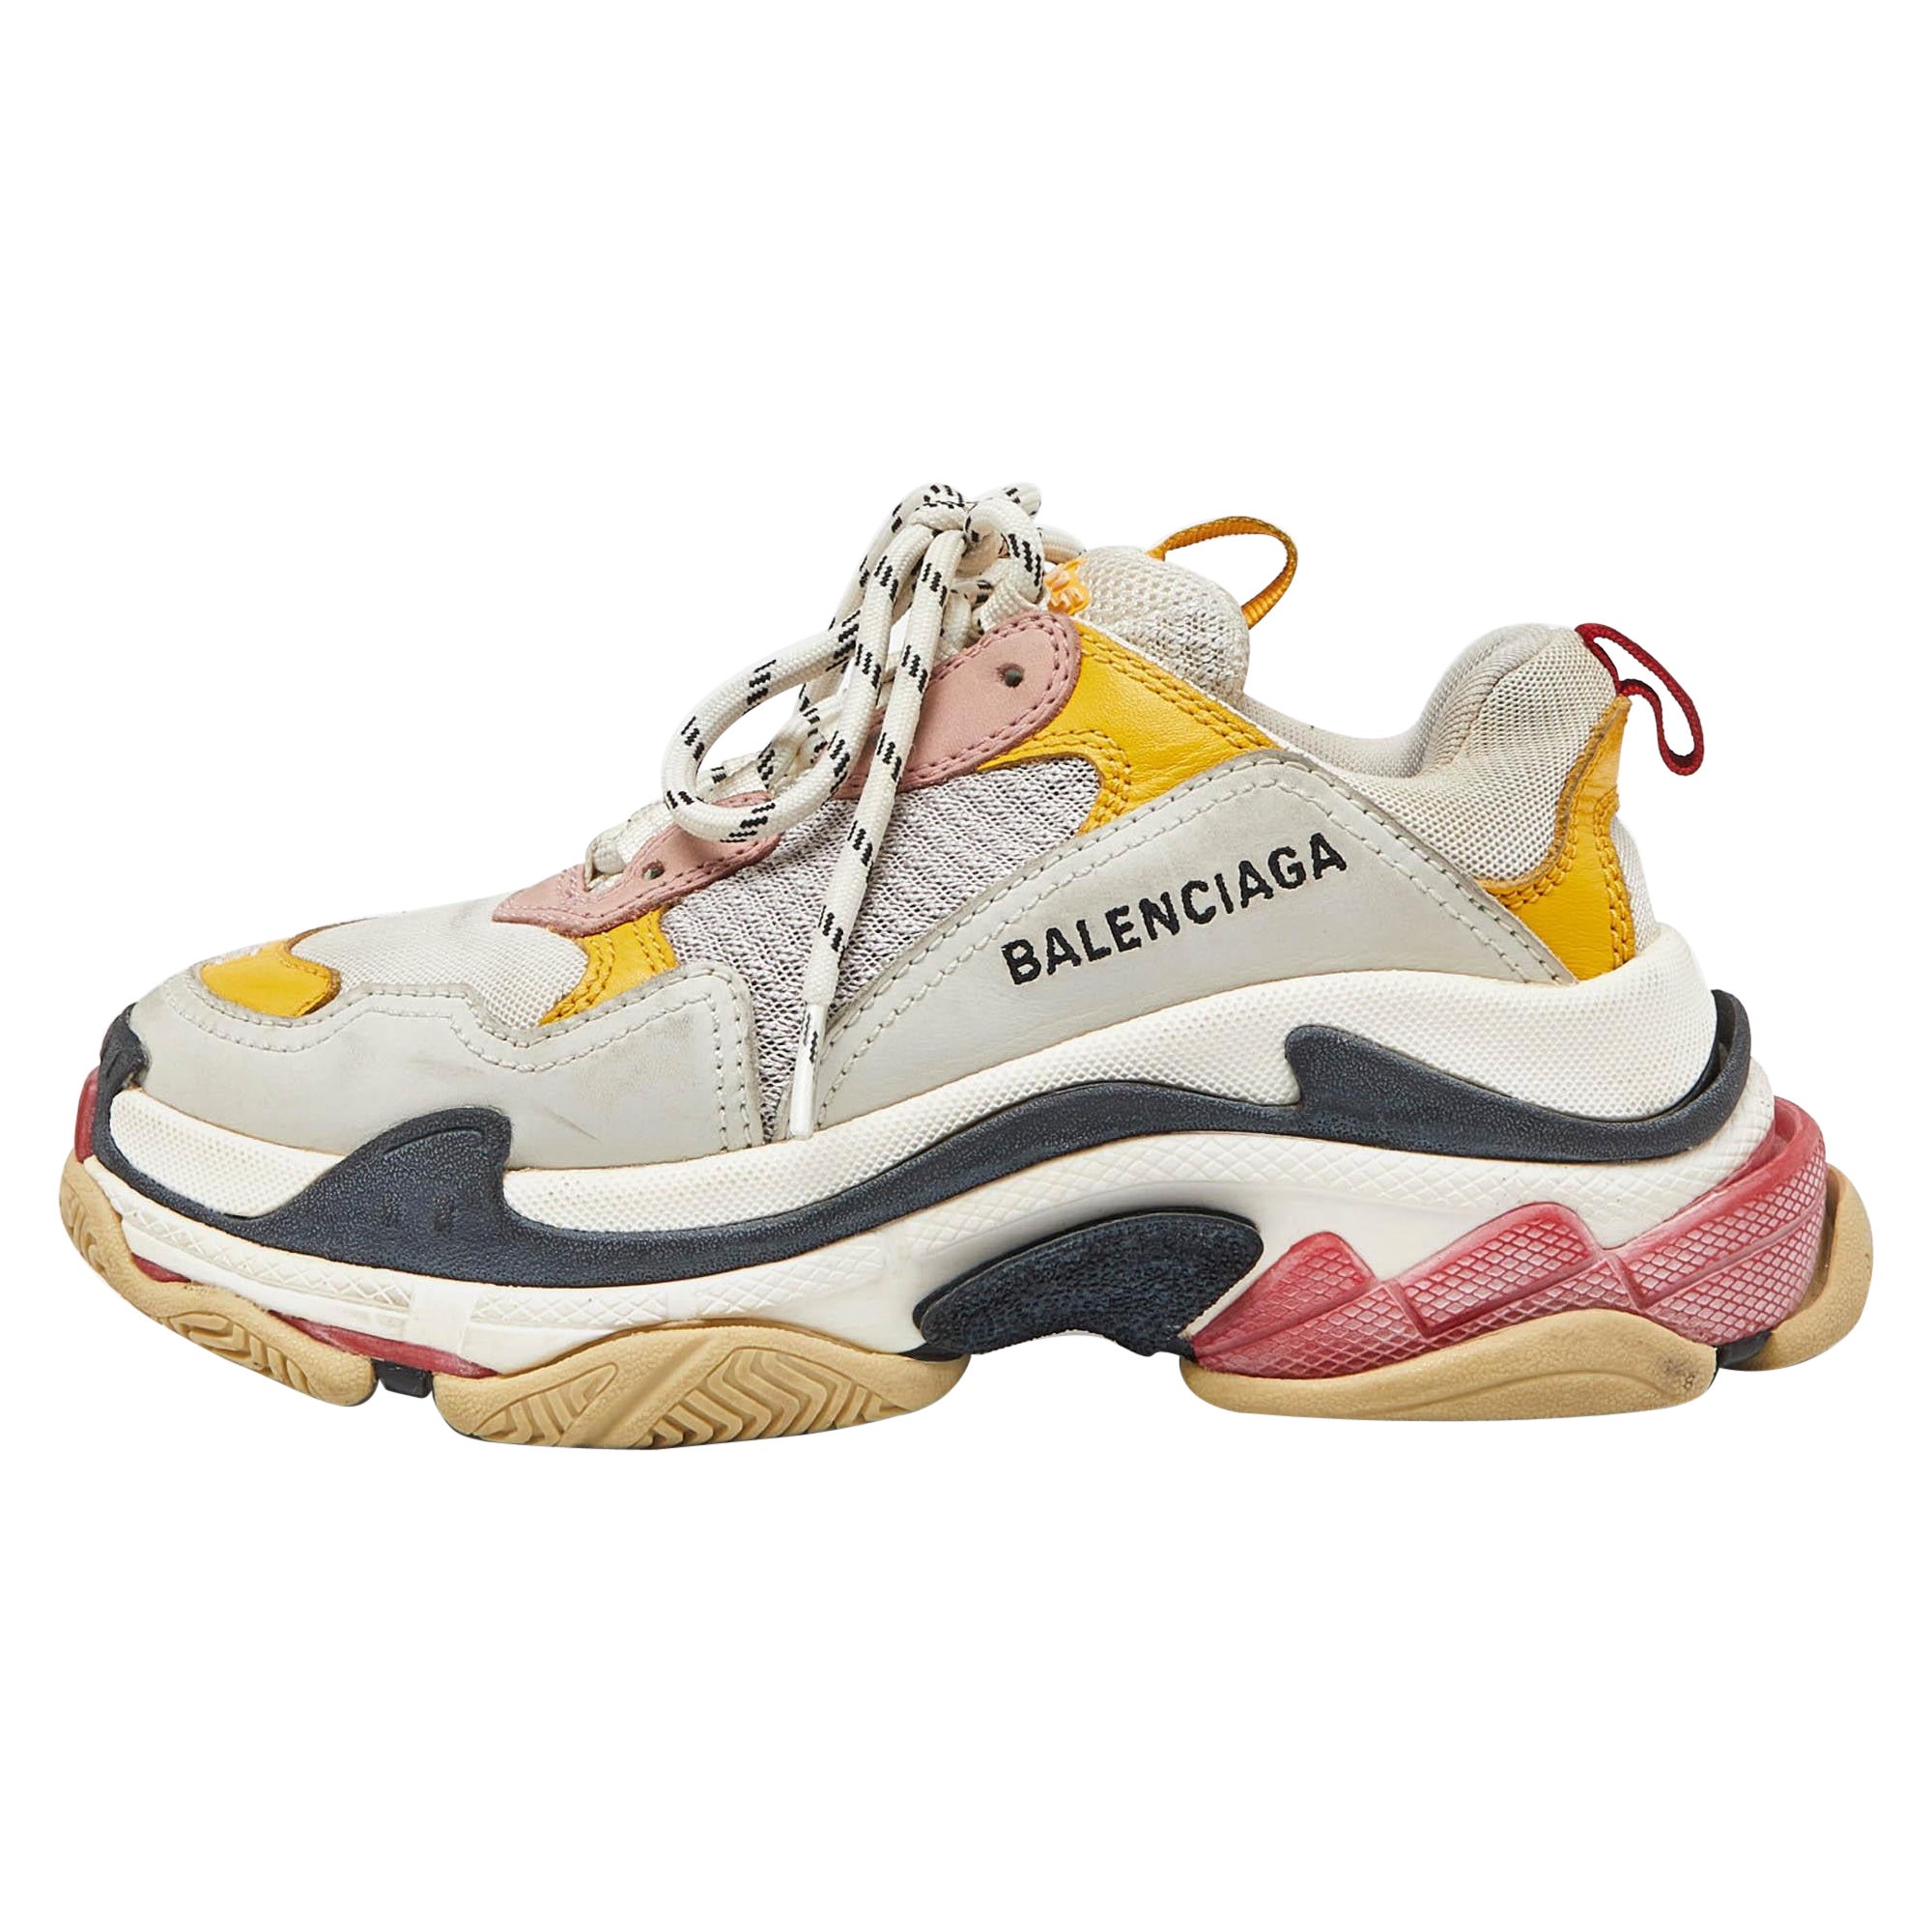 How many Balenciaga stores are there in the U.S.?